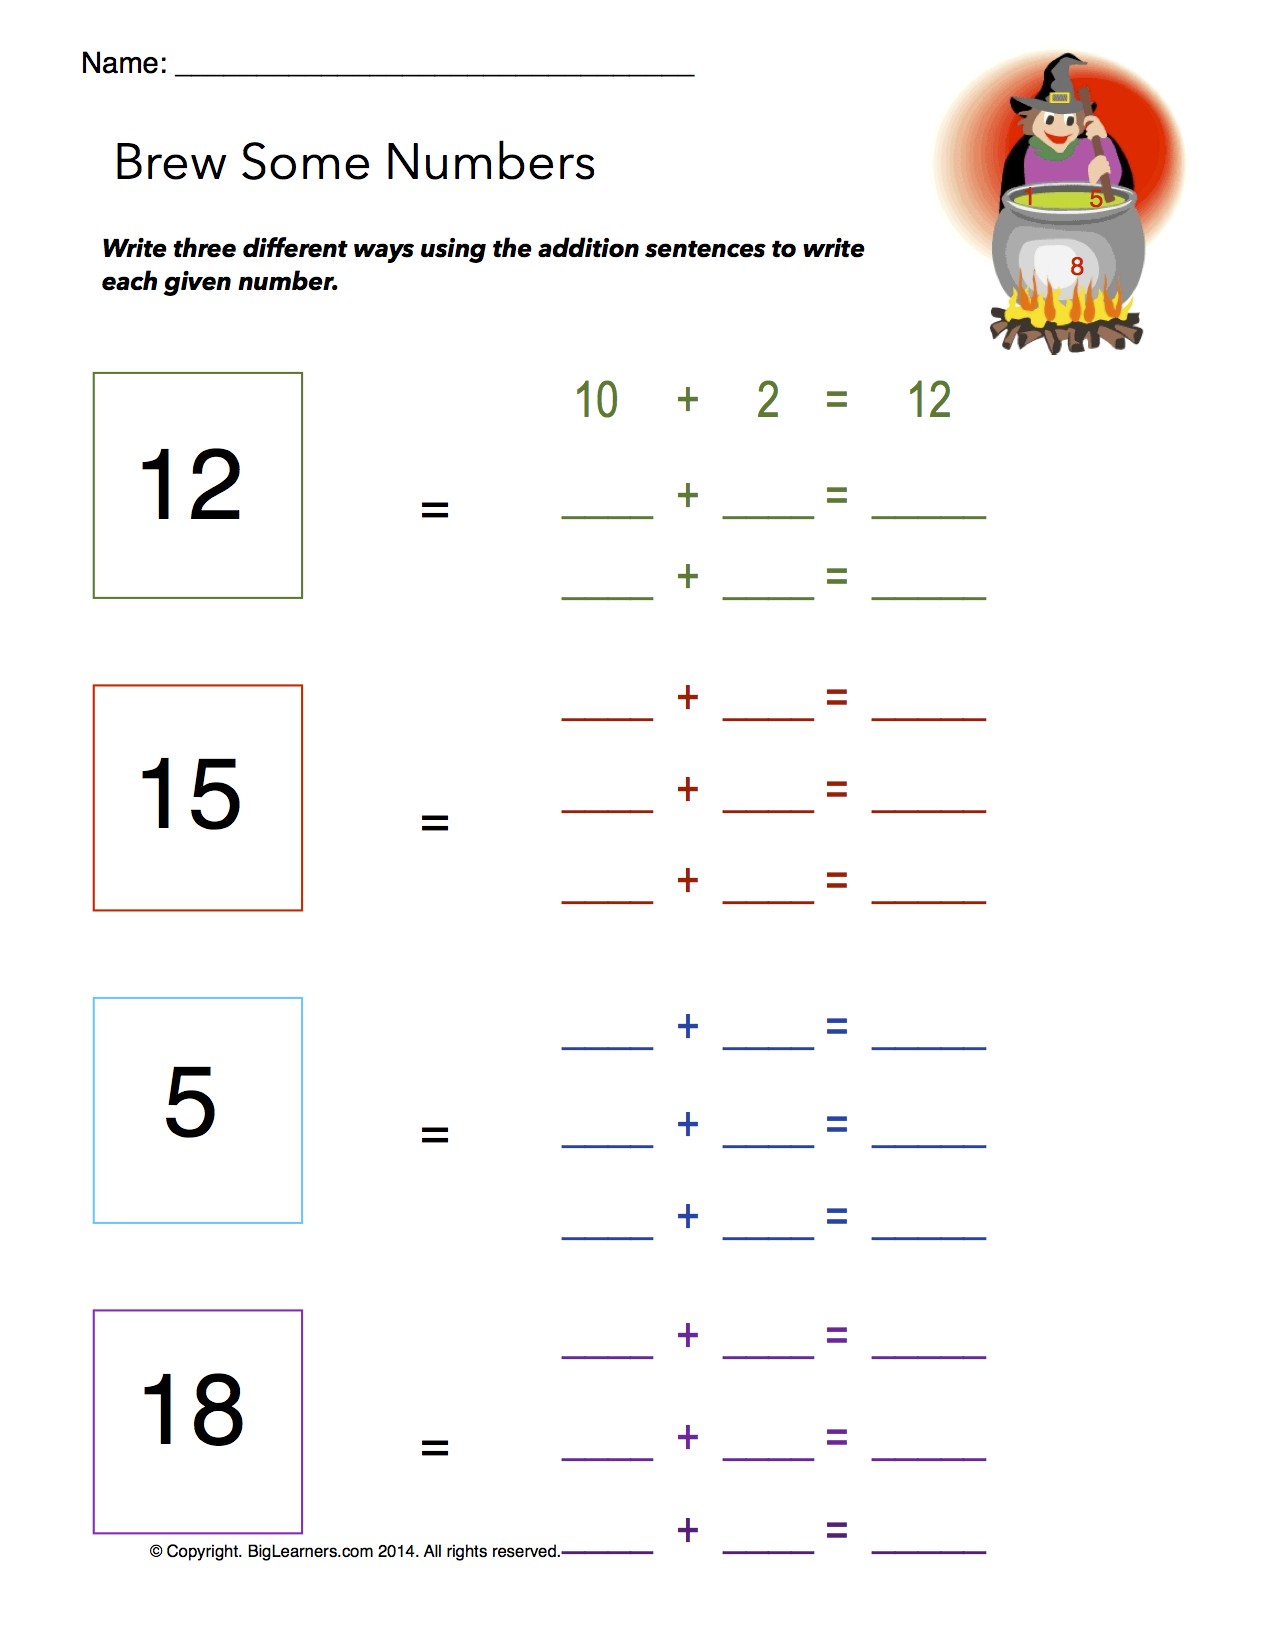 Preview image for worksheet with title Brew Some Numbers